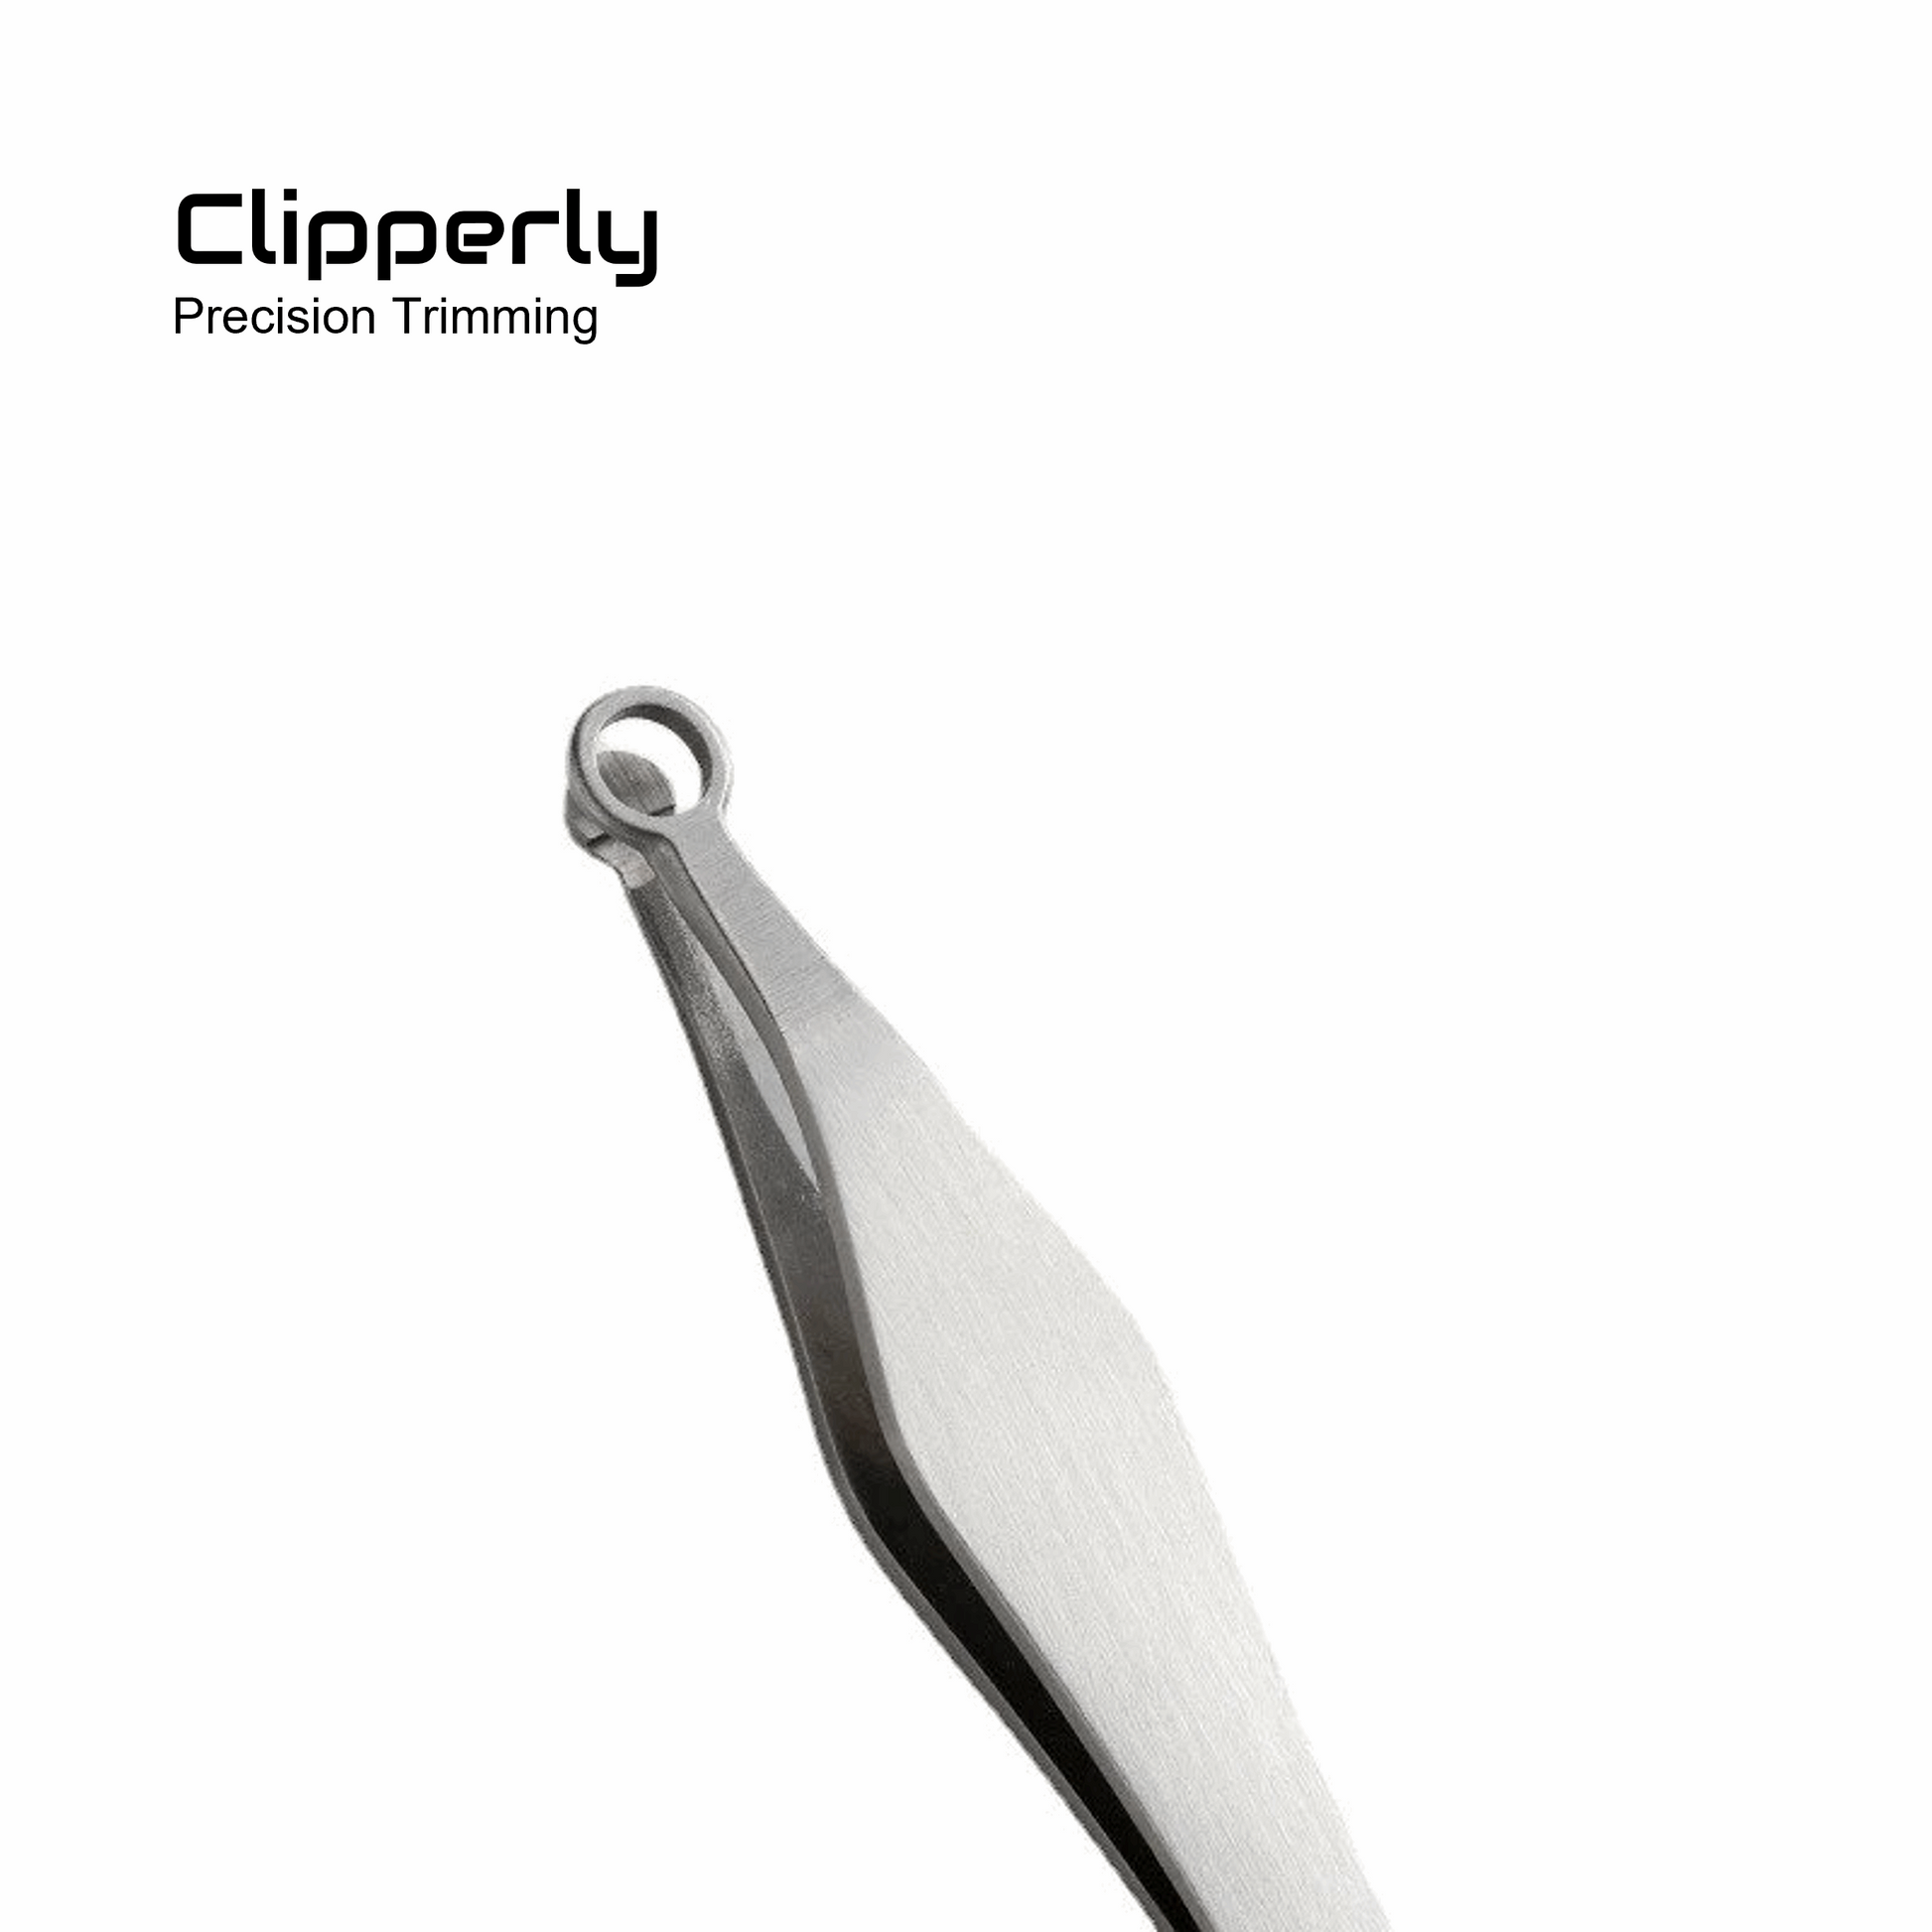 Clipperly Nose Hair Tweezers for Precision Trimming